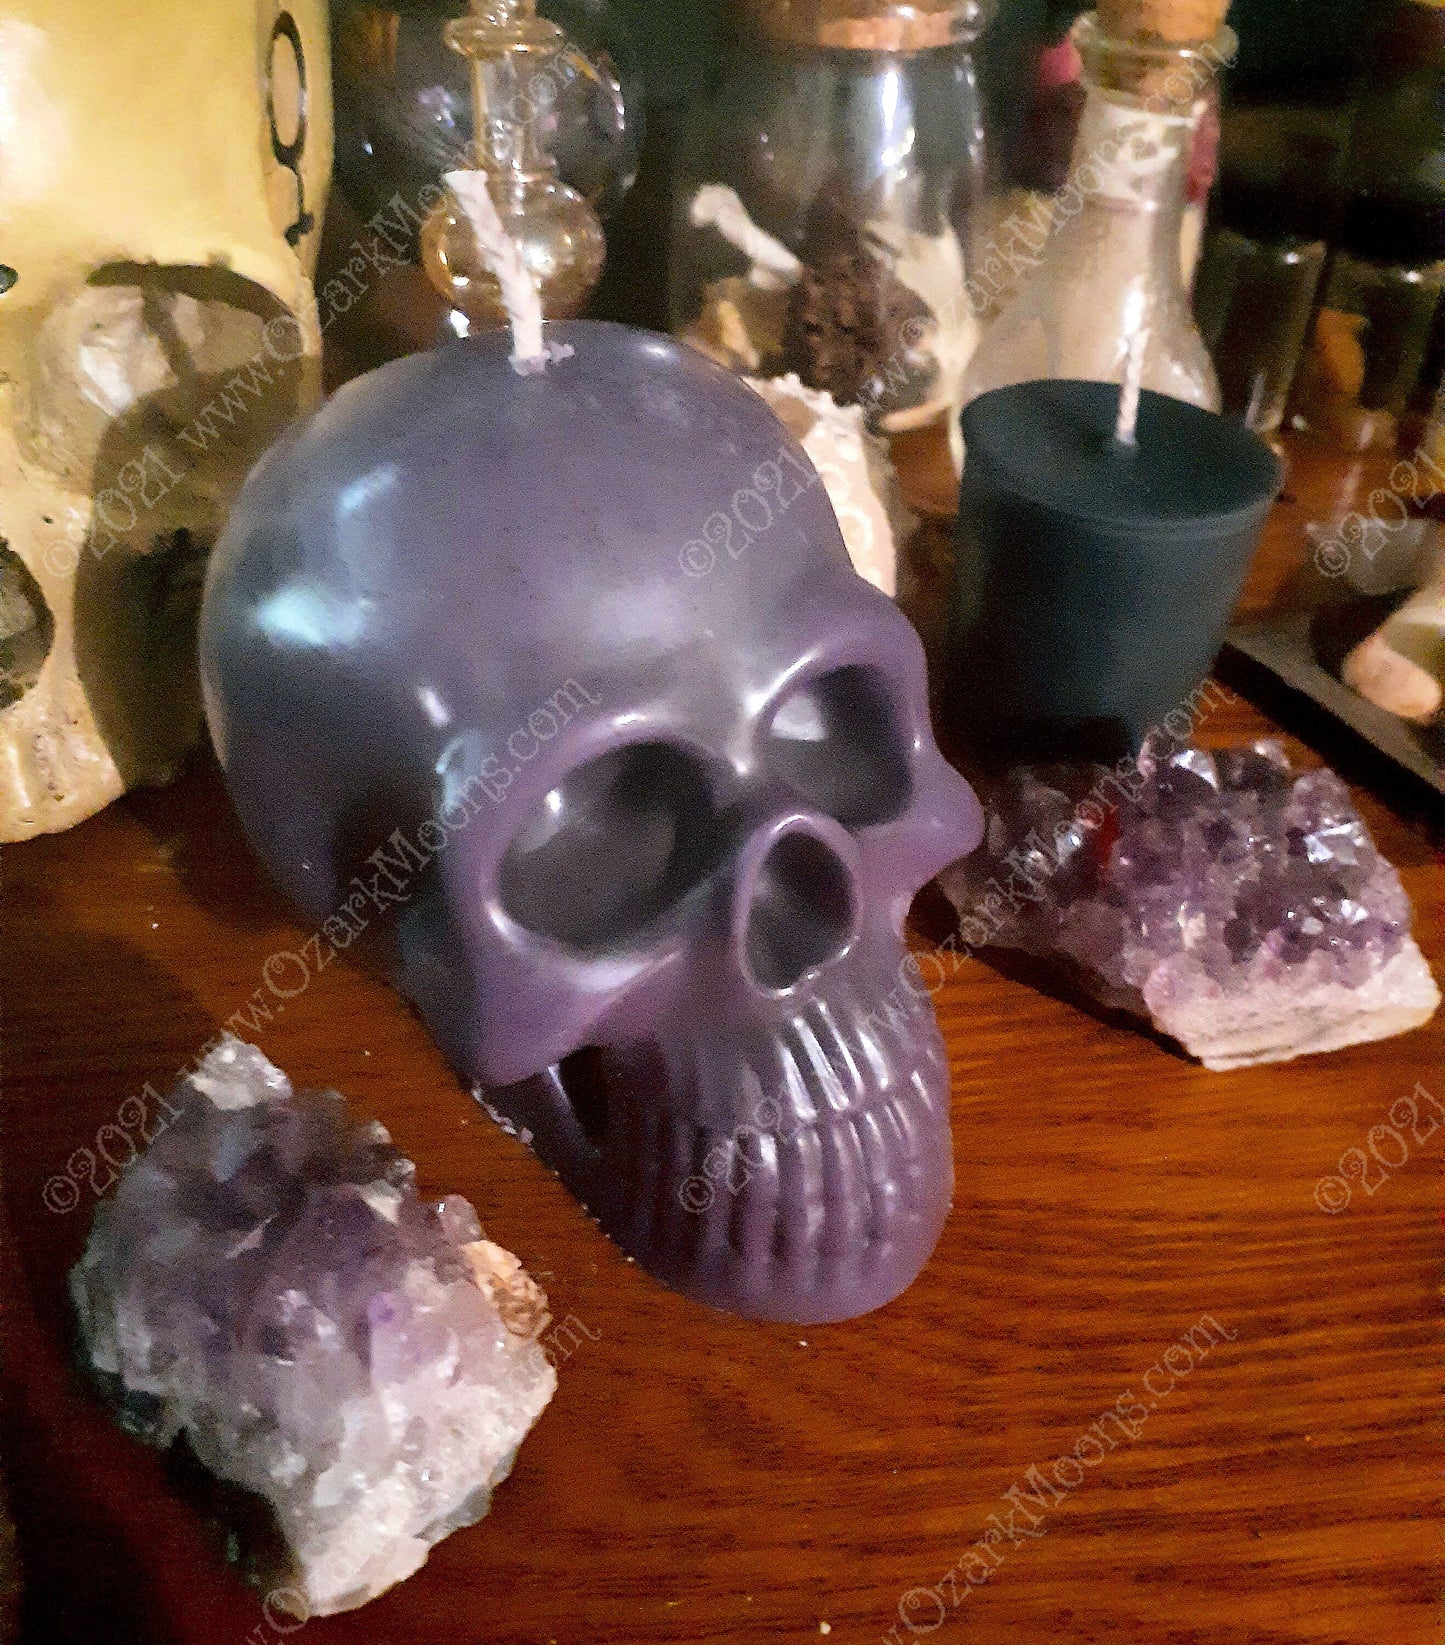 Extra Large 3D Human Skull Candle 3.5"x3"x4.5" Scented Glow-In-The-Dark for Halloween Samhain Wiccan Wicca Altar Supplies Pagan Witch Skulls